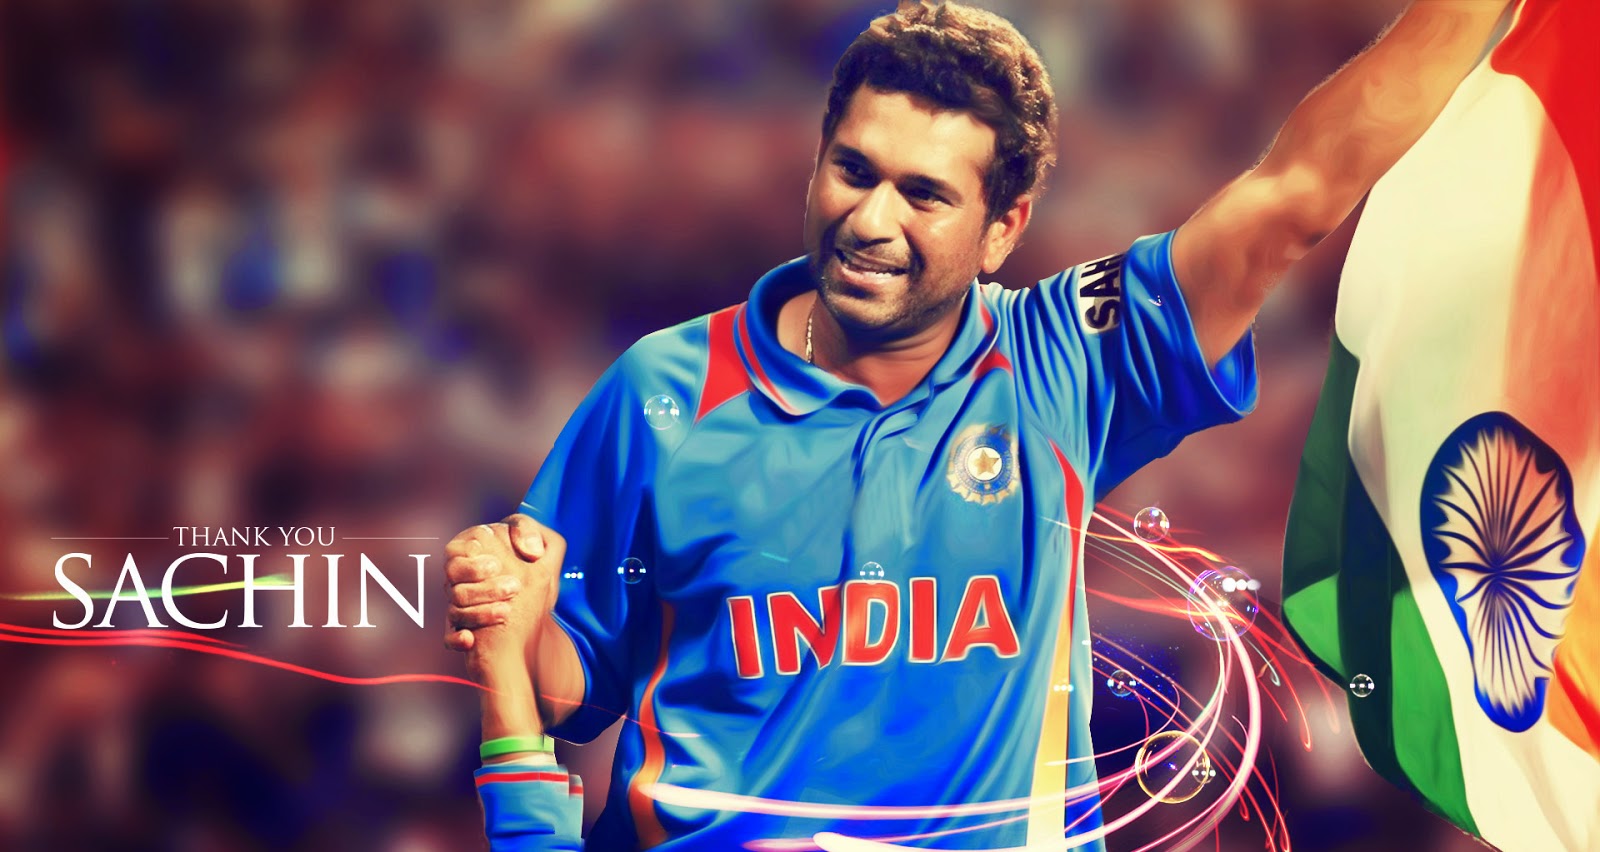 Indian cricket wallpapers latest